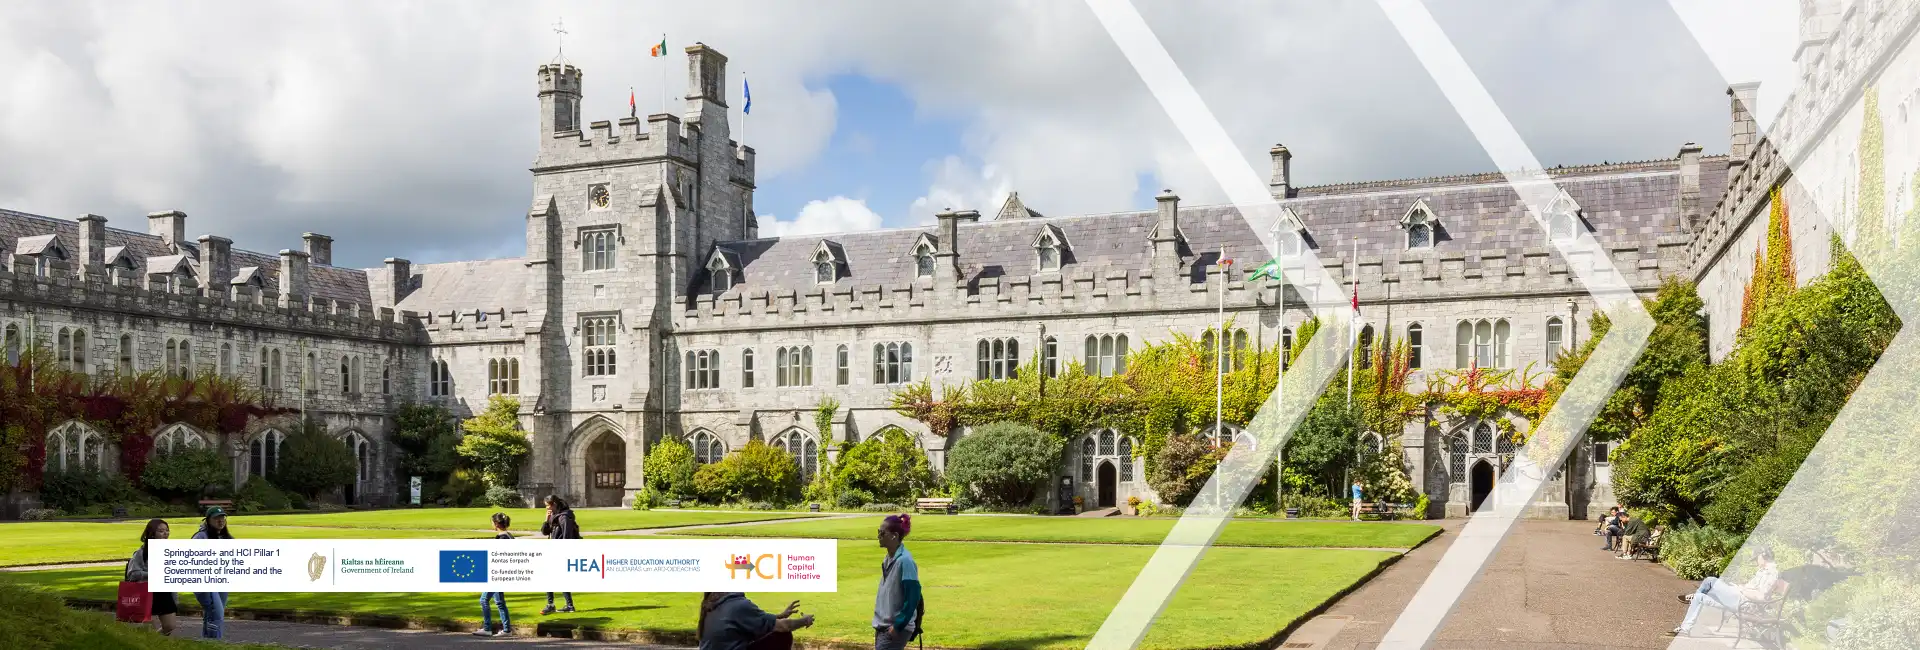 UCC quad with students and HCI logos